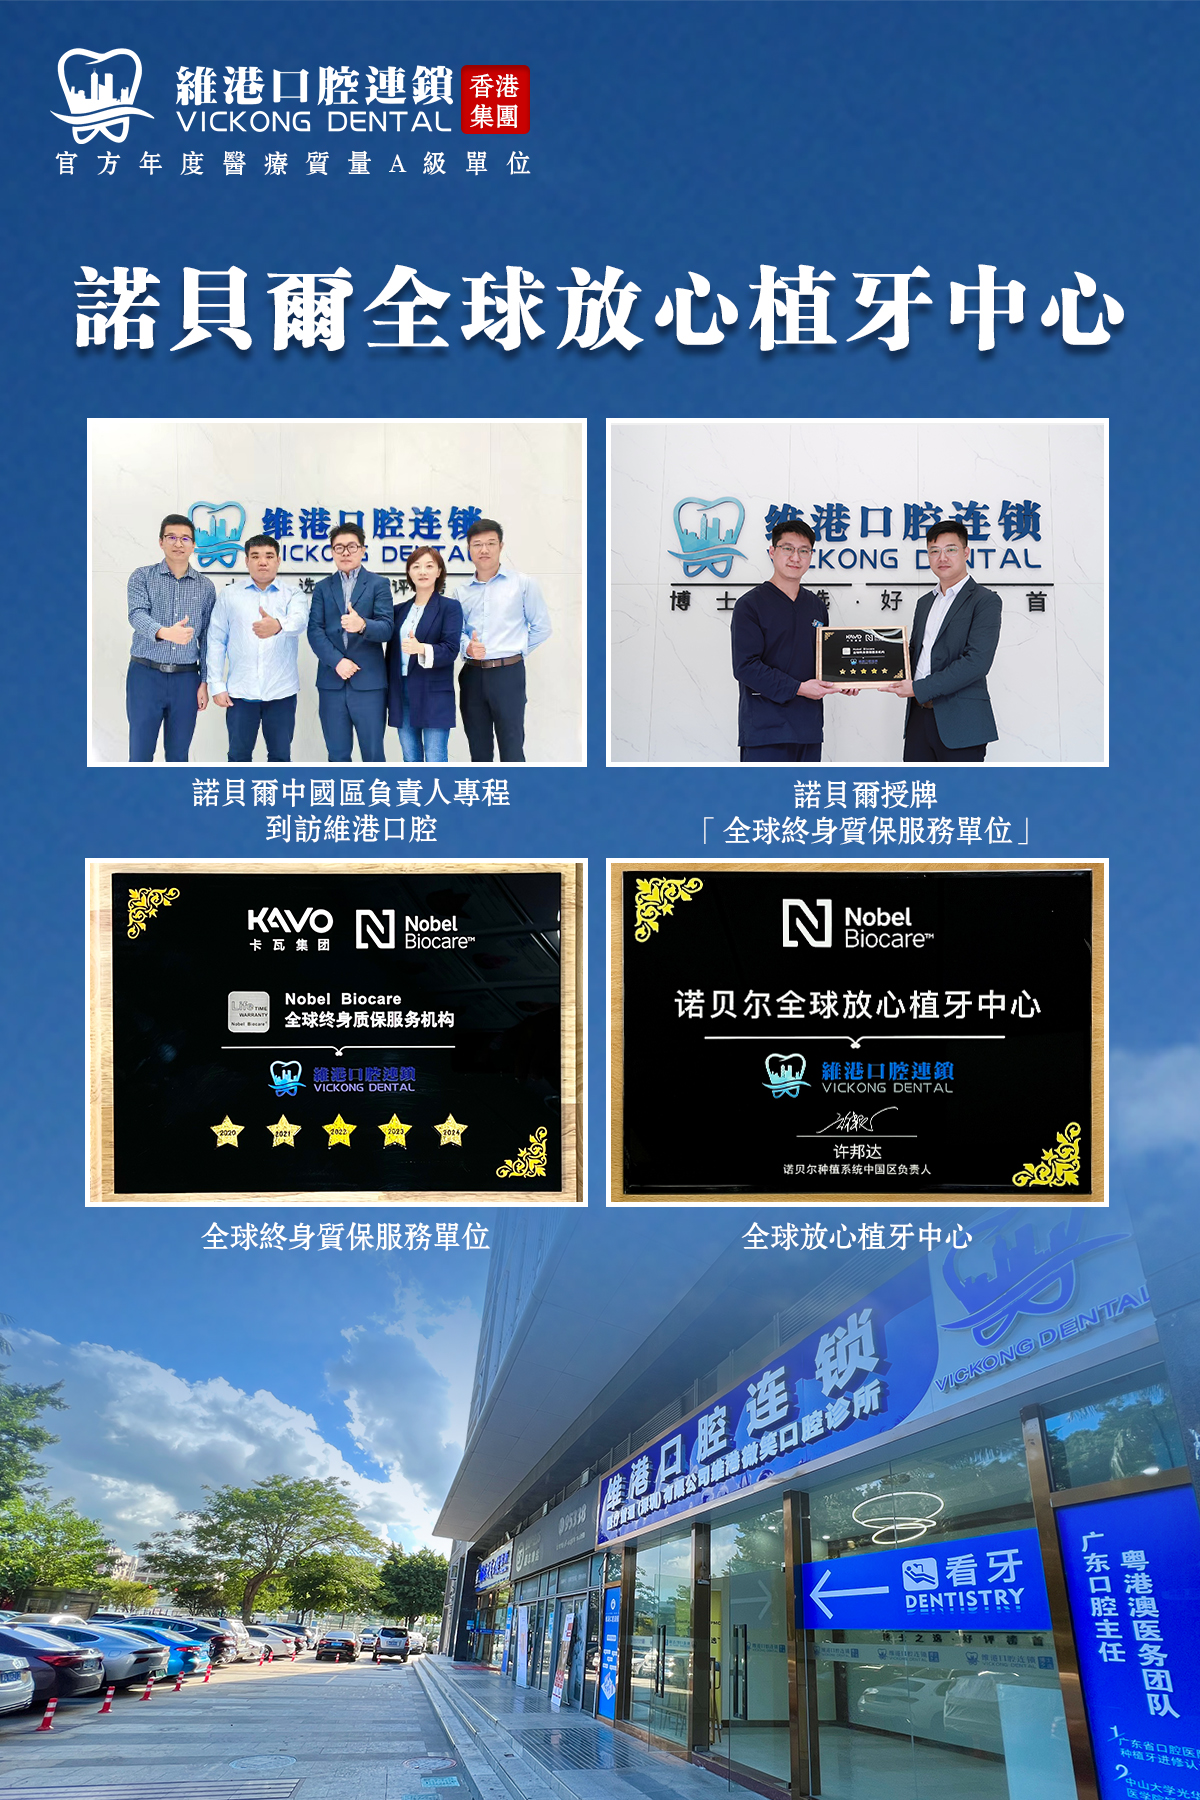 Nobel China Regional Manager Awarded Honorary Certification to Vickong Dental "Global Trust Dental Implant Center"